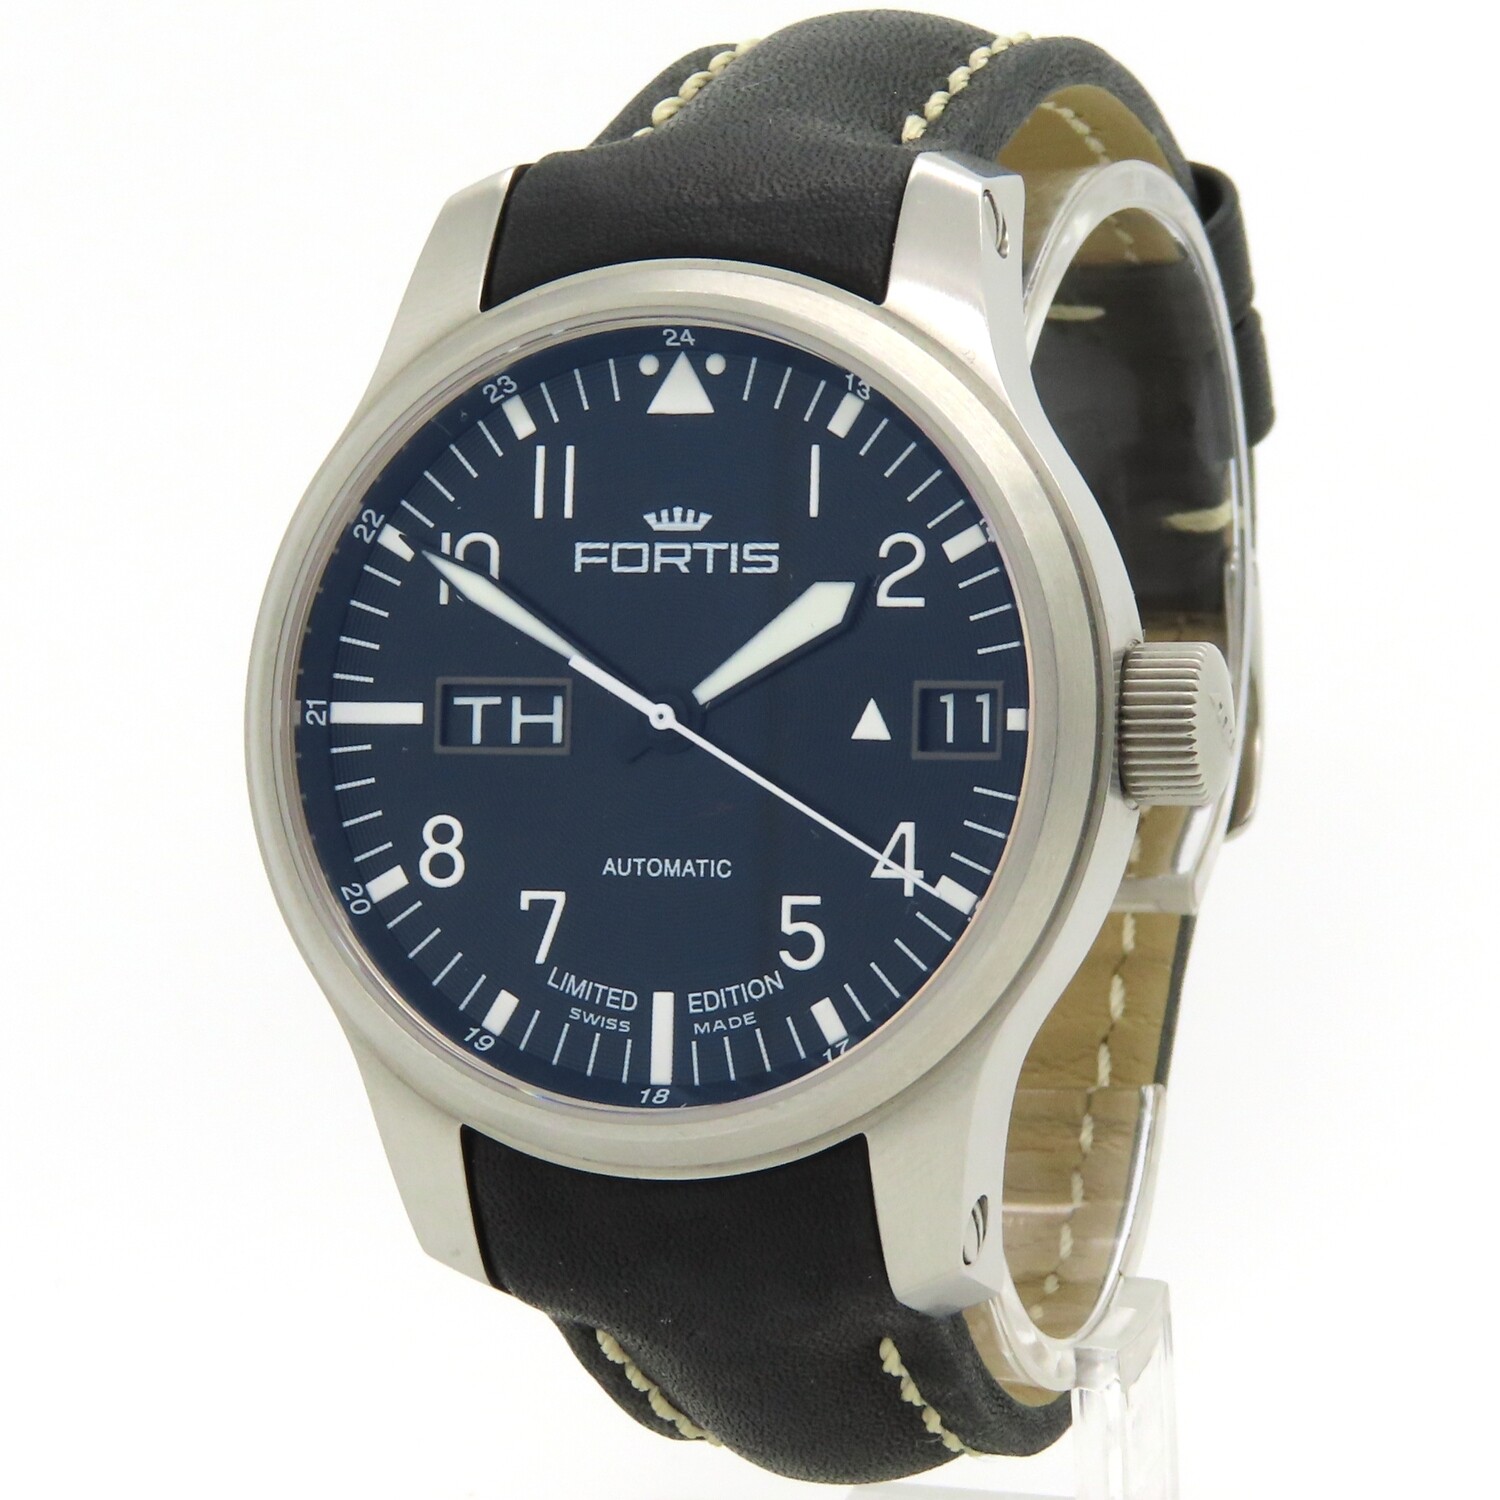 Fortis F-43 Flieger Limited Edition